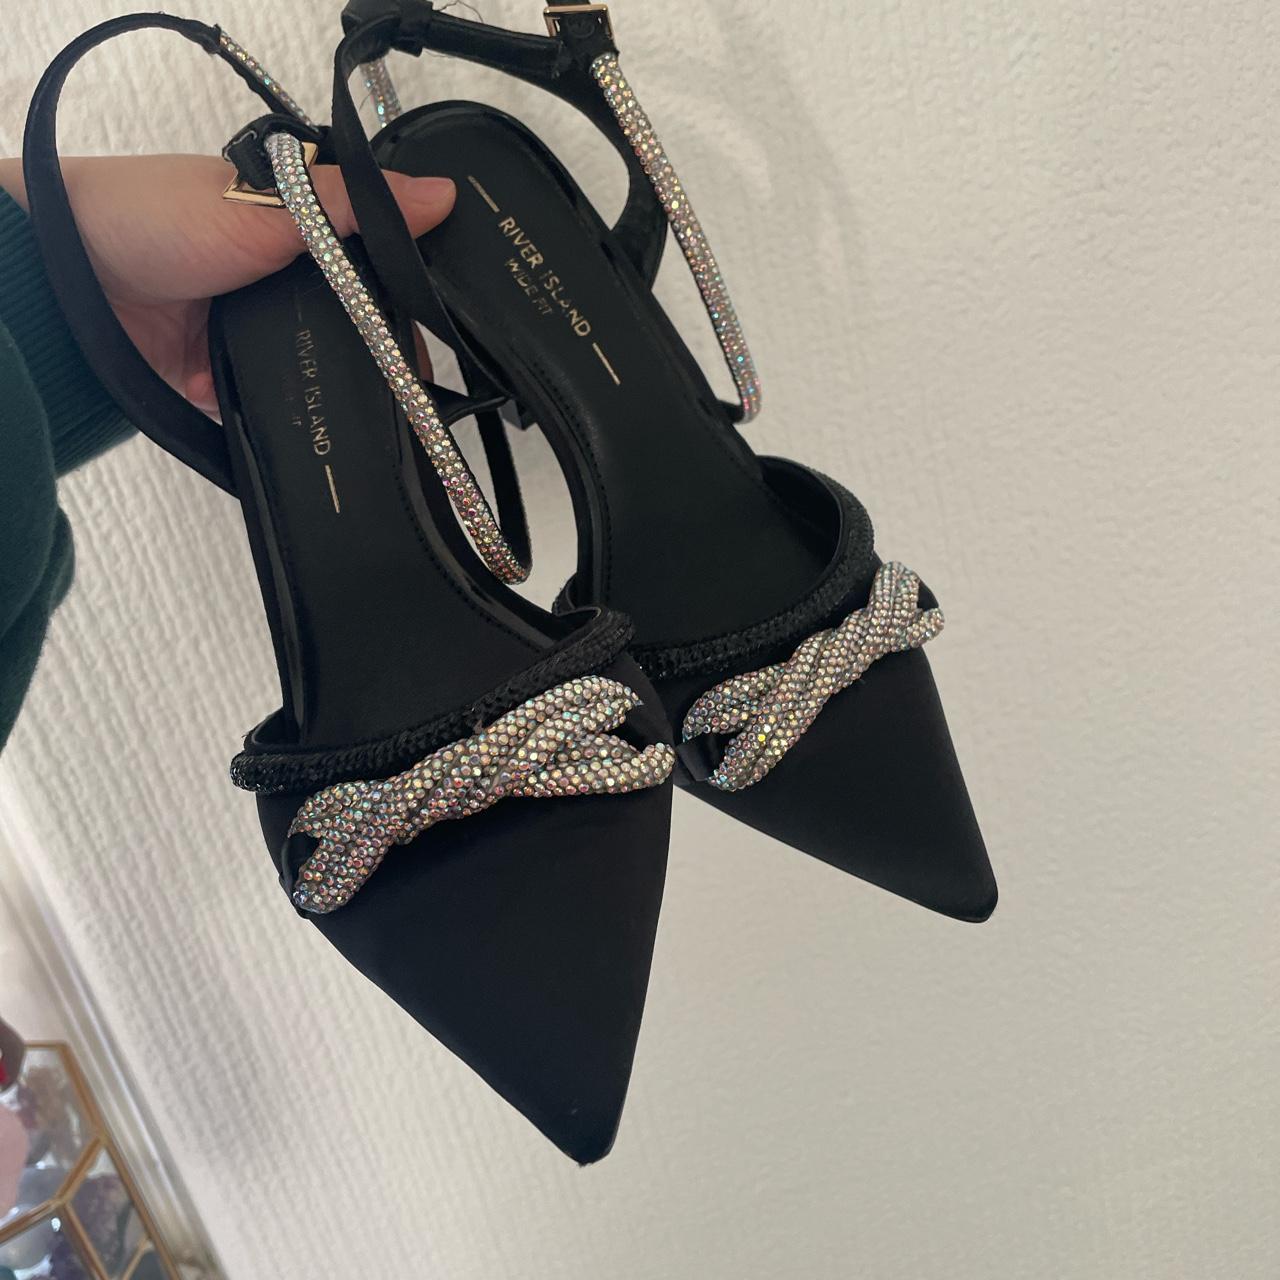 River Island wide fit heels with a wrap around detail - Depop